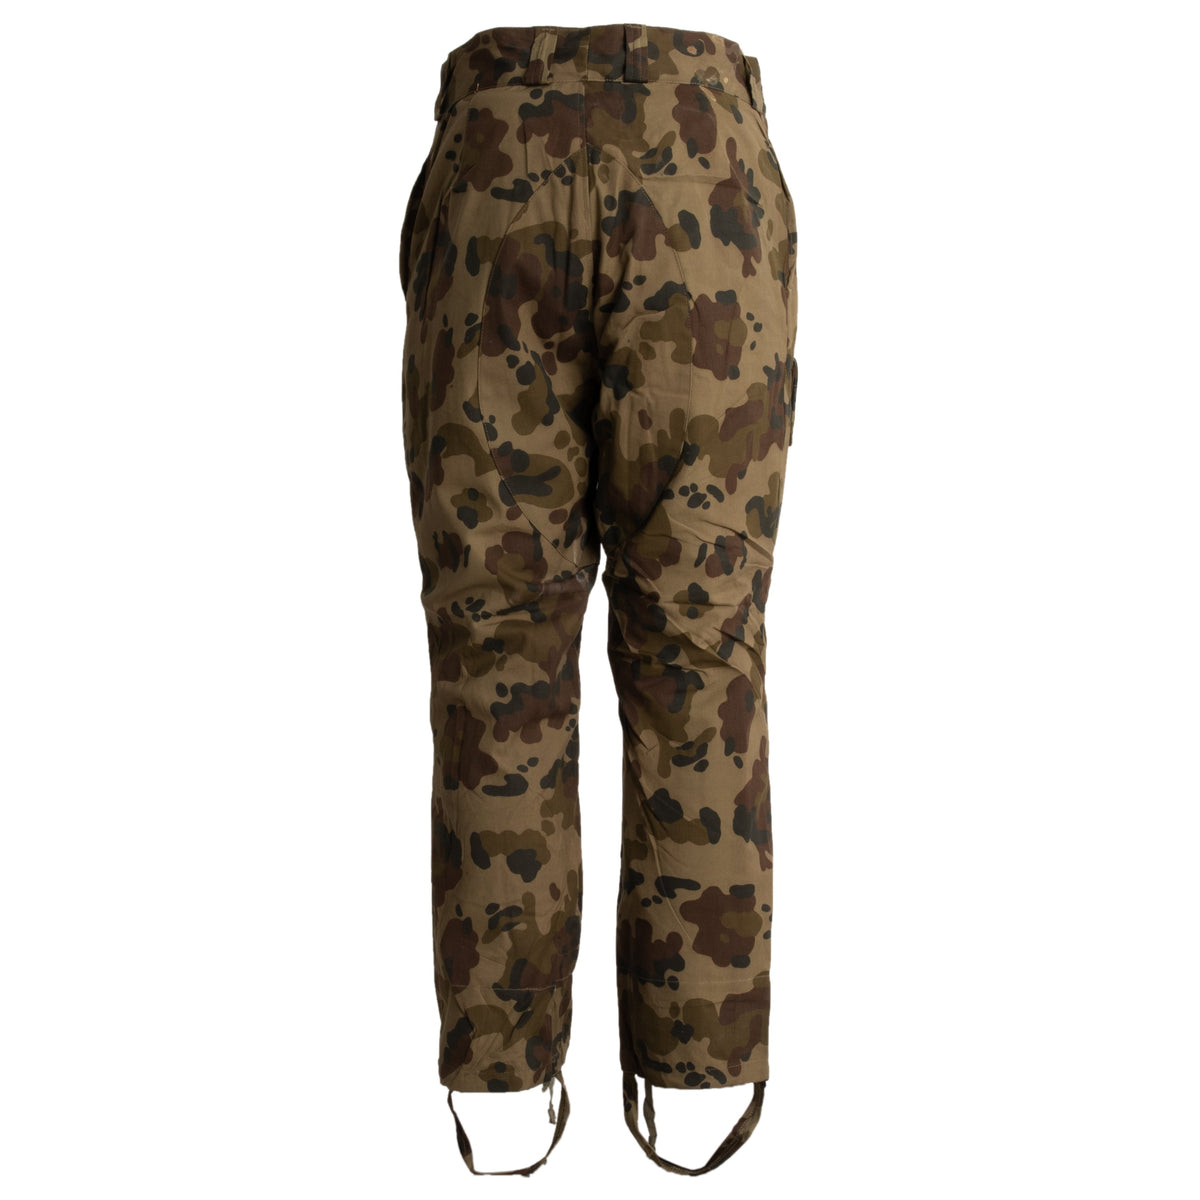 Romanian M94 Spotted Camo Pants | Used Condition